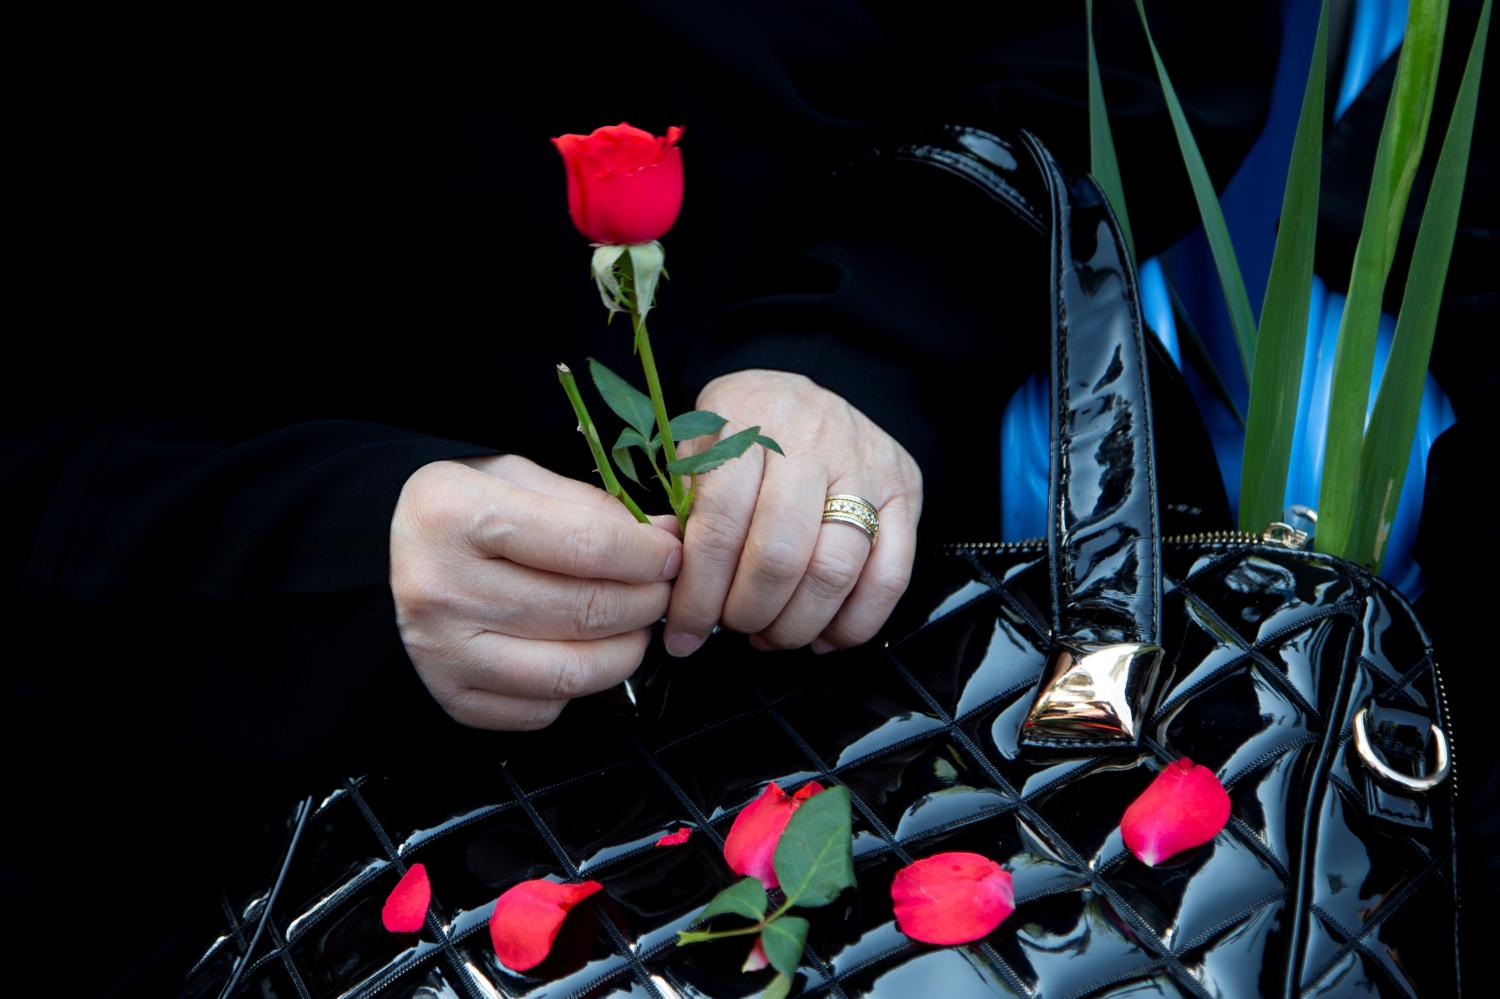 REFILE - CORRECTING TYPO  An Iranian woman holds a red flower as she attends a ceremony to bury remains of 150 "martyrs" from 1980-88 Iran-Iraq war in Tehran, Iran June 27, 2019. Nazanin Tabatabaee/West Asia News Agency via REUTERS. ATTENTION EDITORS - THIS PICTURE WAS PROVIDED BY A THIRD PARTY